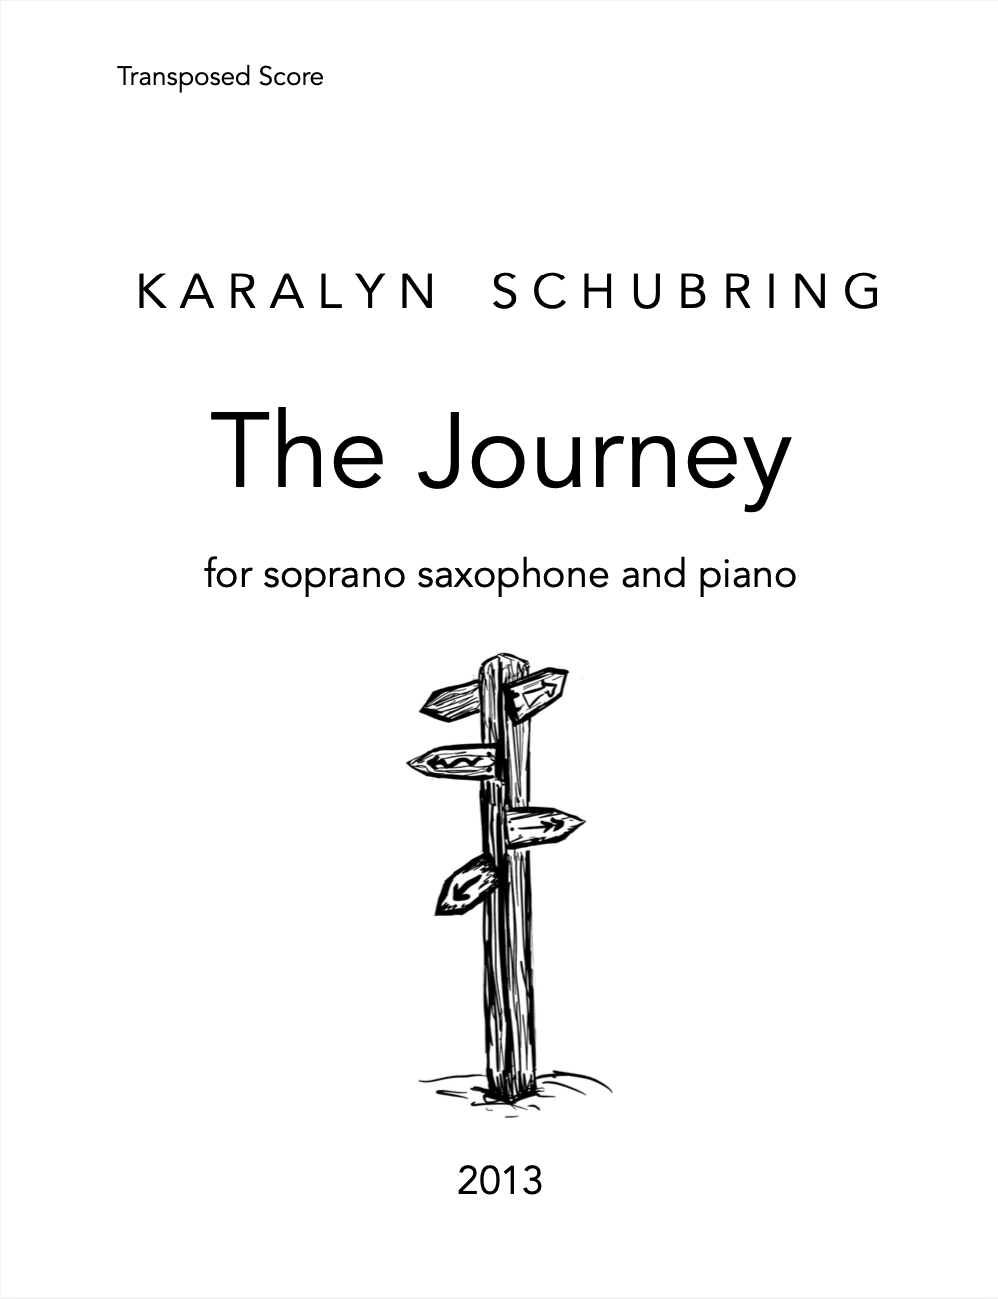 The Journey by Karalyn Schubring